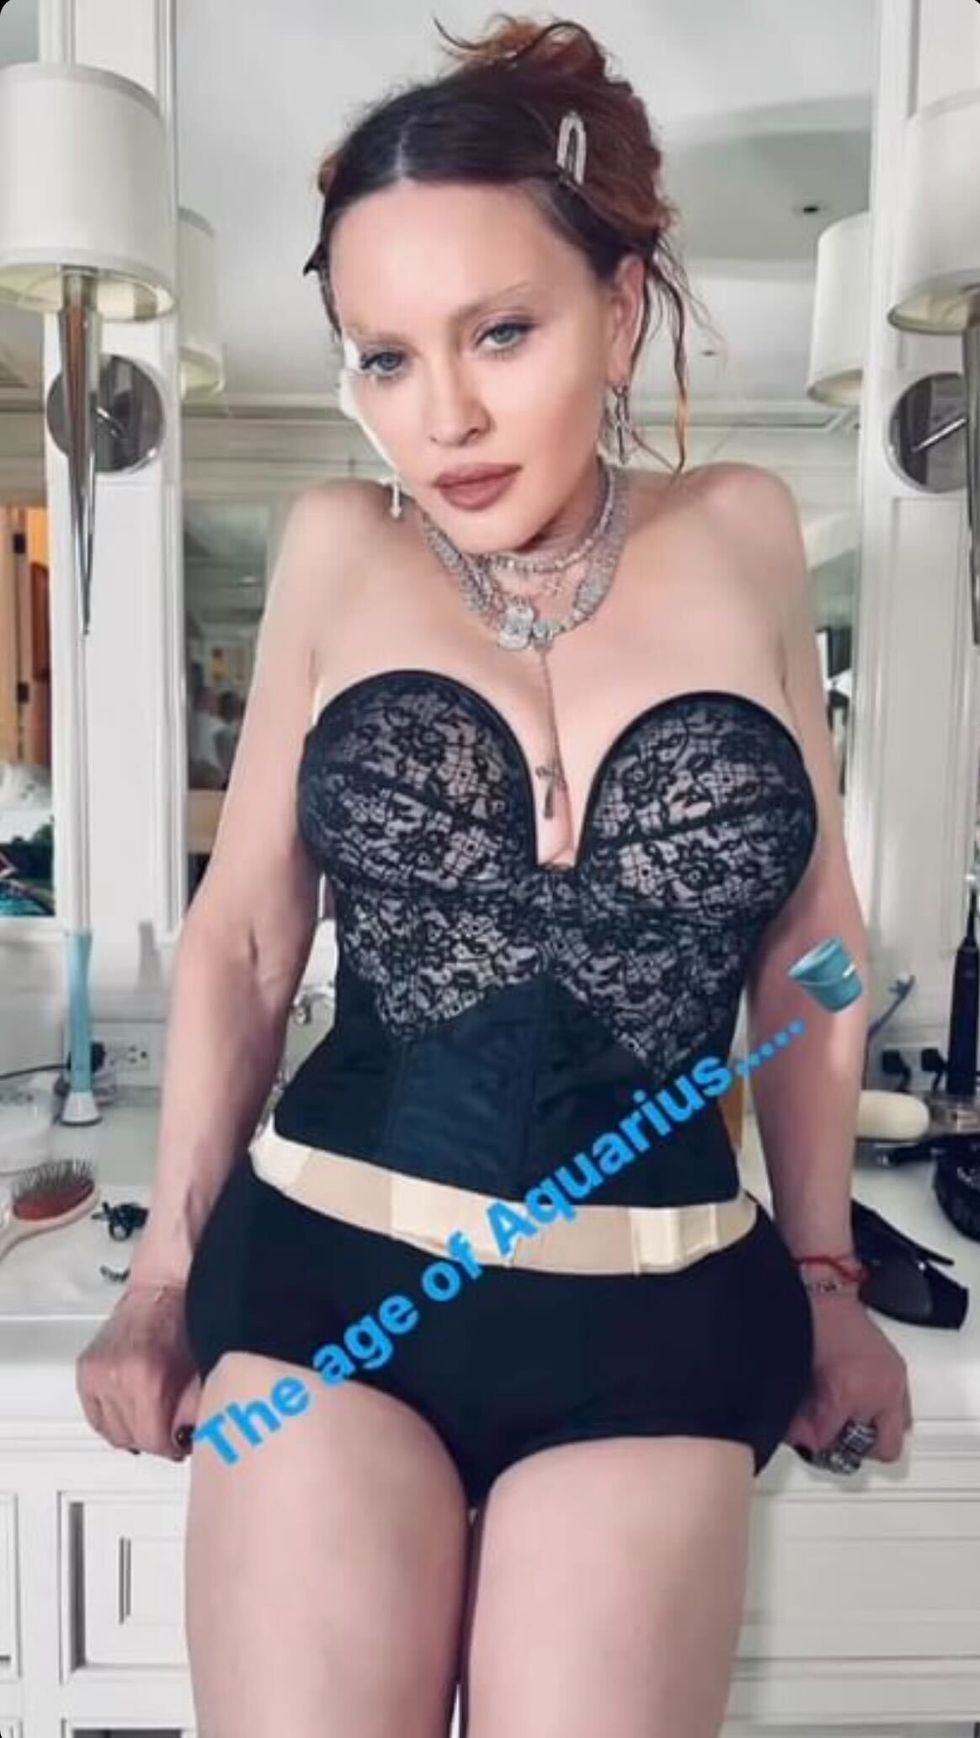 Madonna Slays With Toned AF Arms And Legs In A Revealing Corset On IG ðŸ‘€